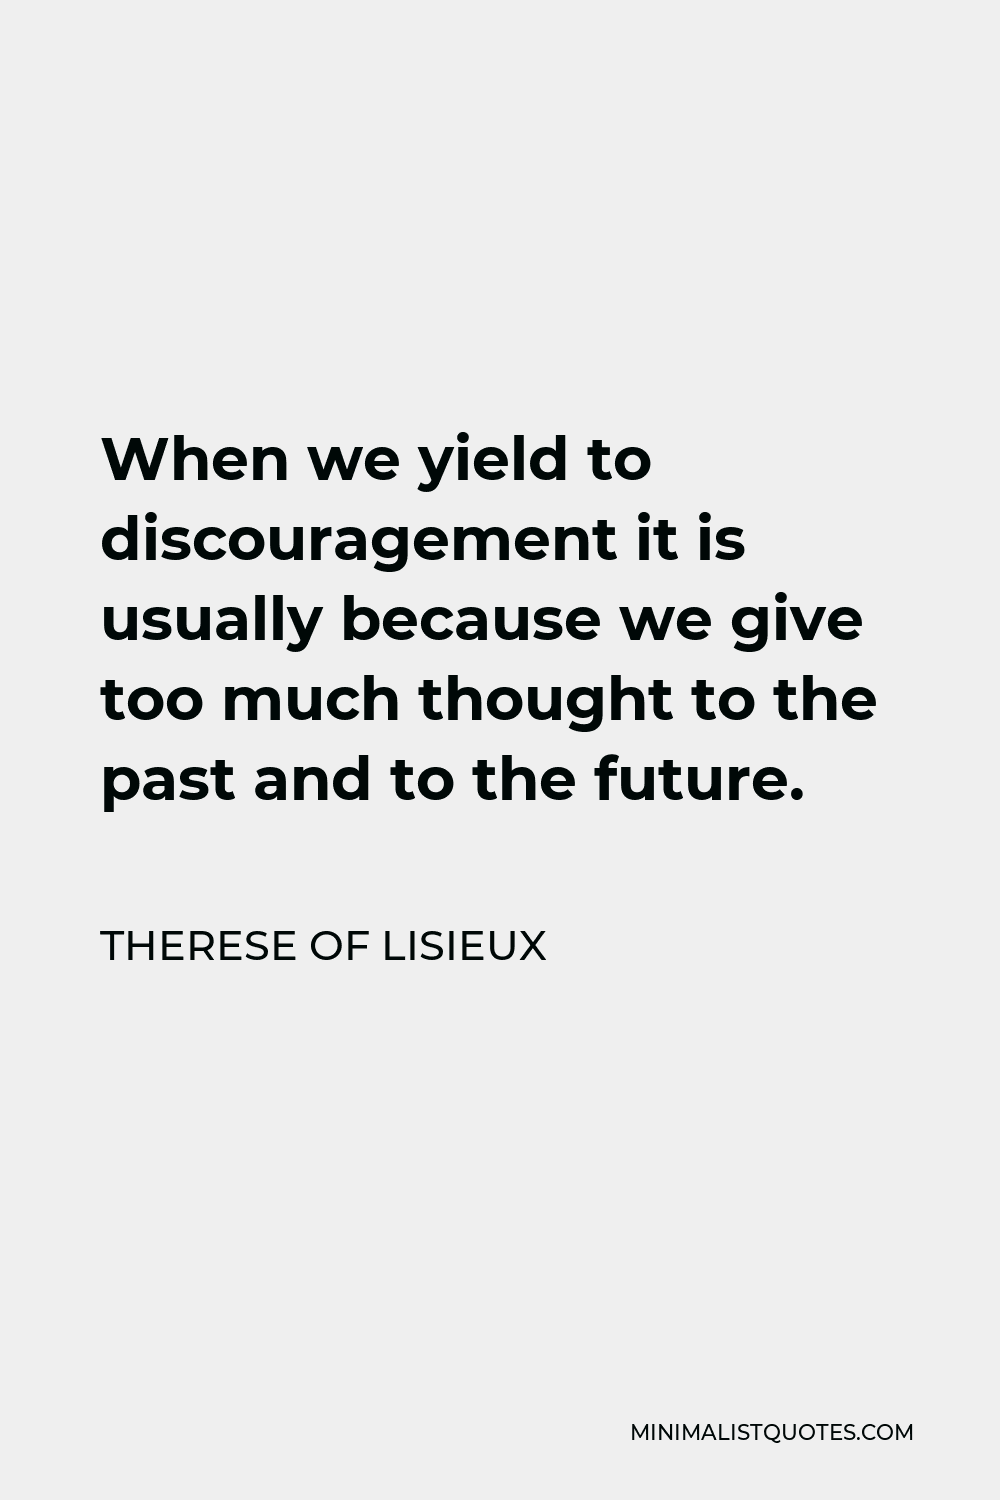 Therese of Lisieux Quote - When we yield to discouragement it is usually because we give too much thought to the past and to the future.